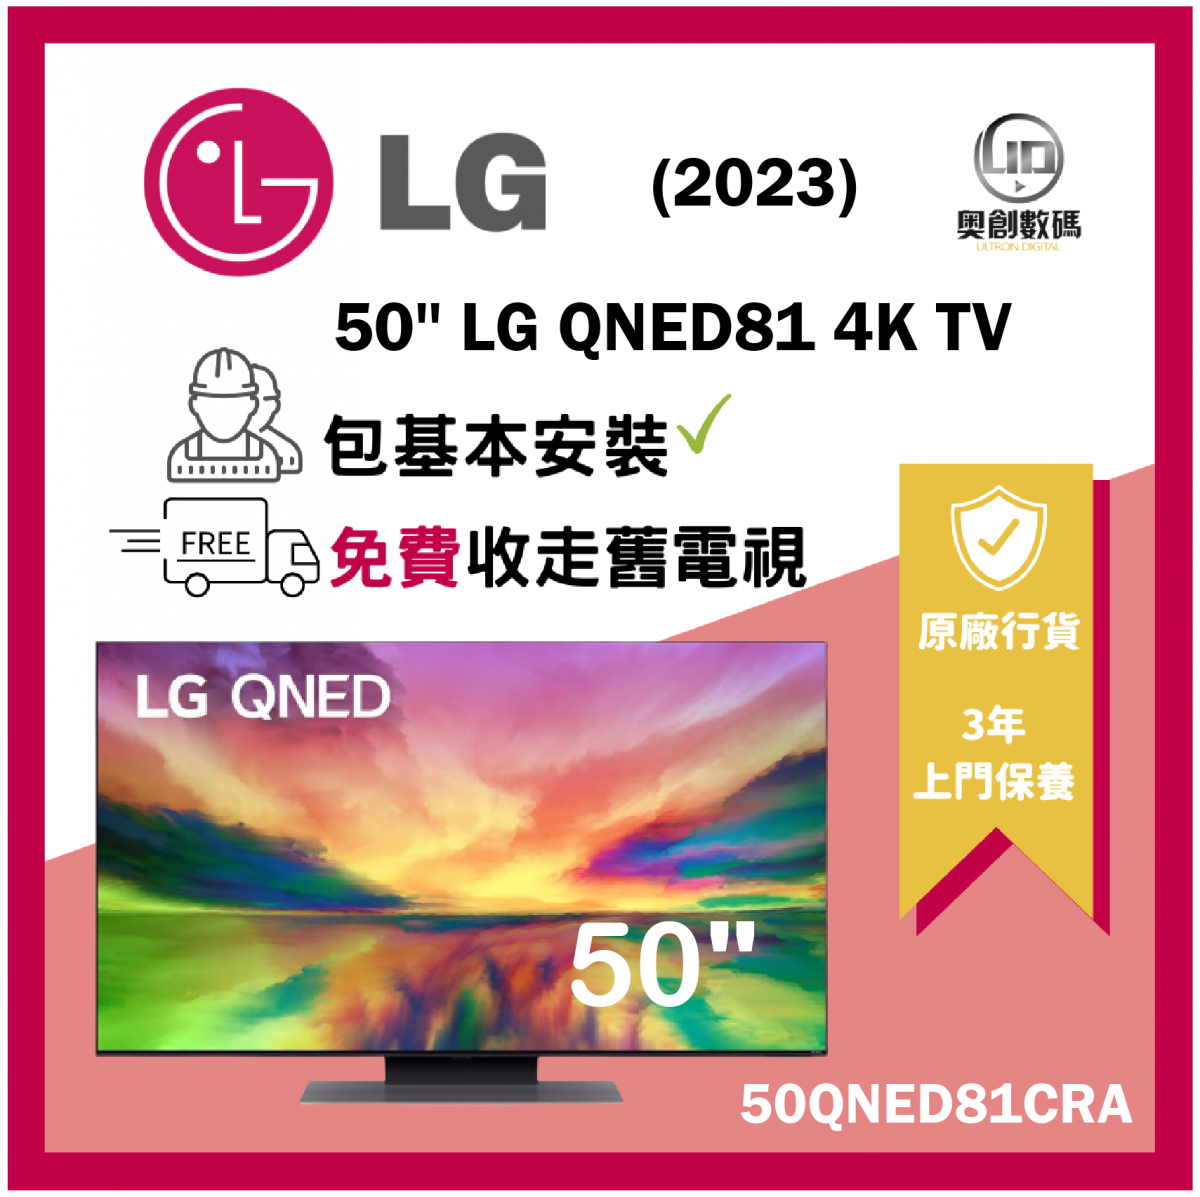 50'' LG QNED81 4K 智能電視 50QNED81CRA 50QNED81 QNED81